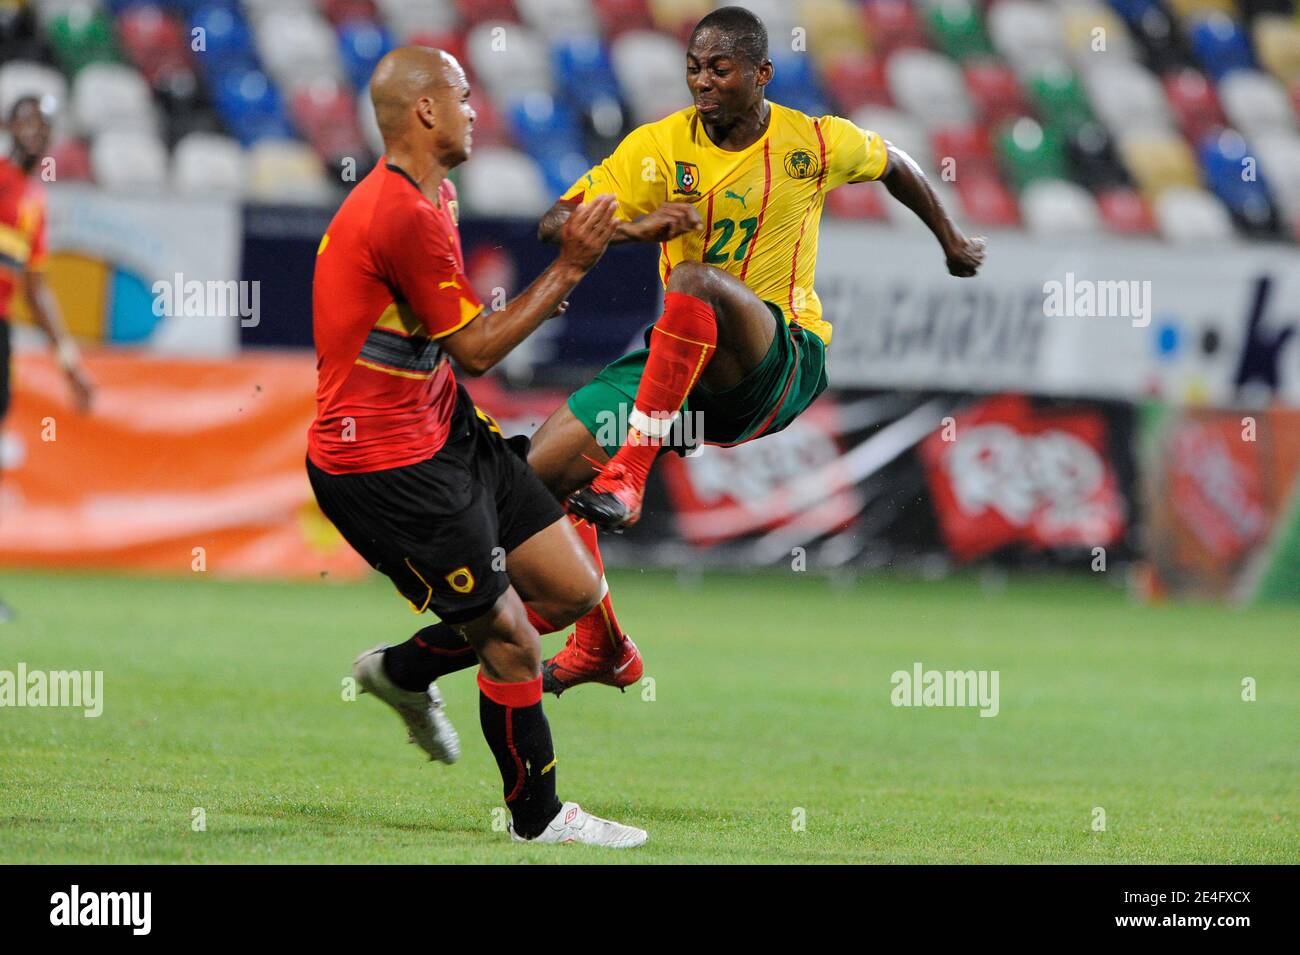 Cameroon's Enoh Eyong battles for the ball with Angola's Kali during a Friendly soccer Match, Cameroon vs Angola in Olhao, Portugal on October 14, 2009. The match ended in a 1-1 draw. Photo by Henri Szwarc/ABACAPRESS.COM Stock Photo